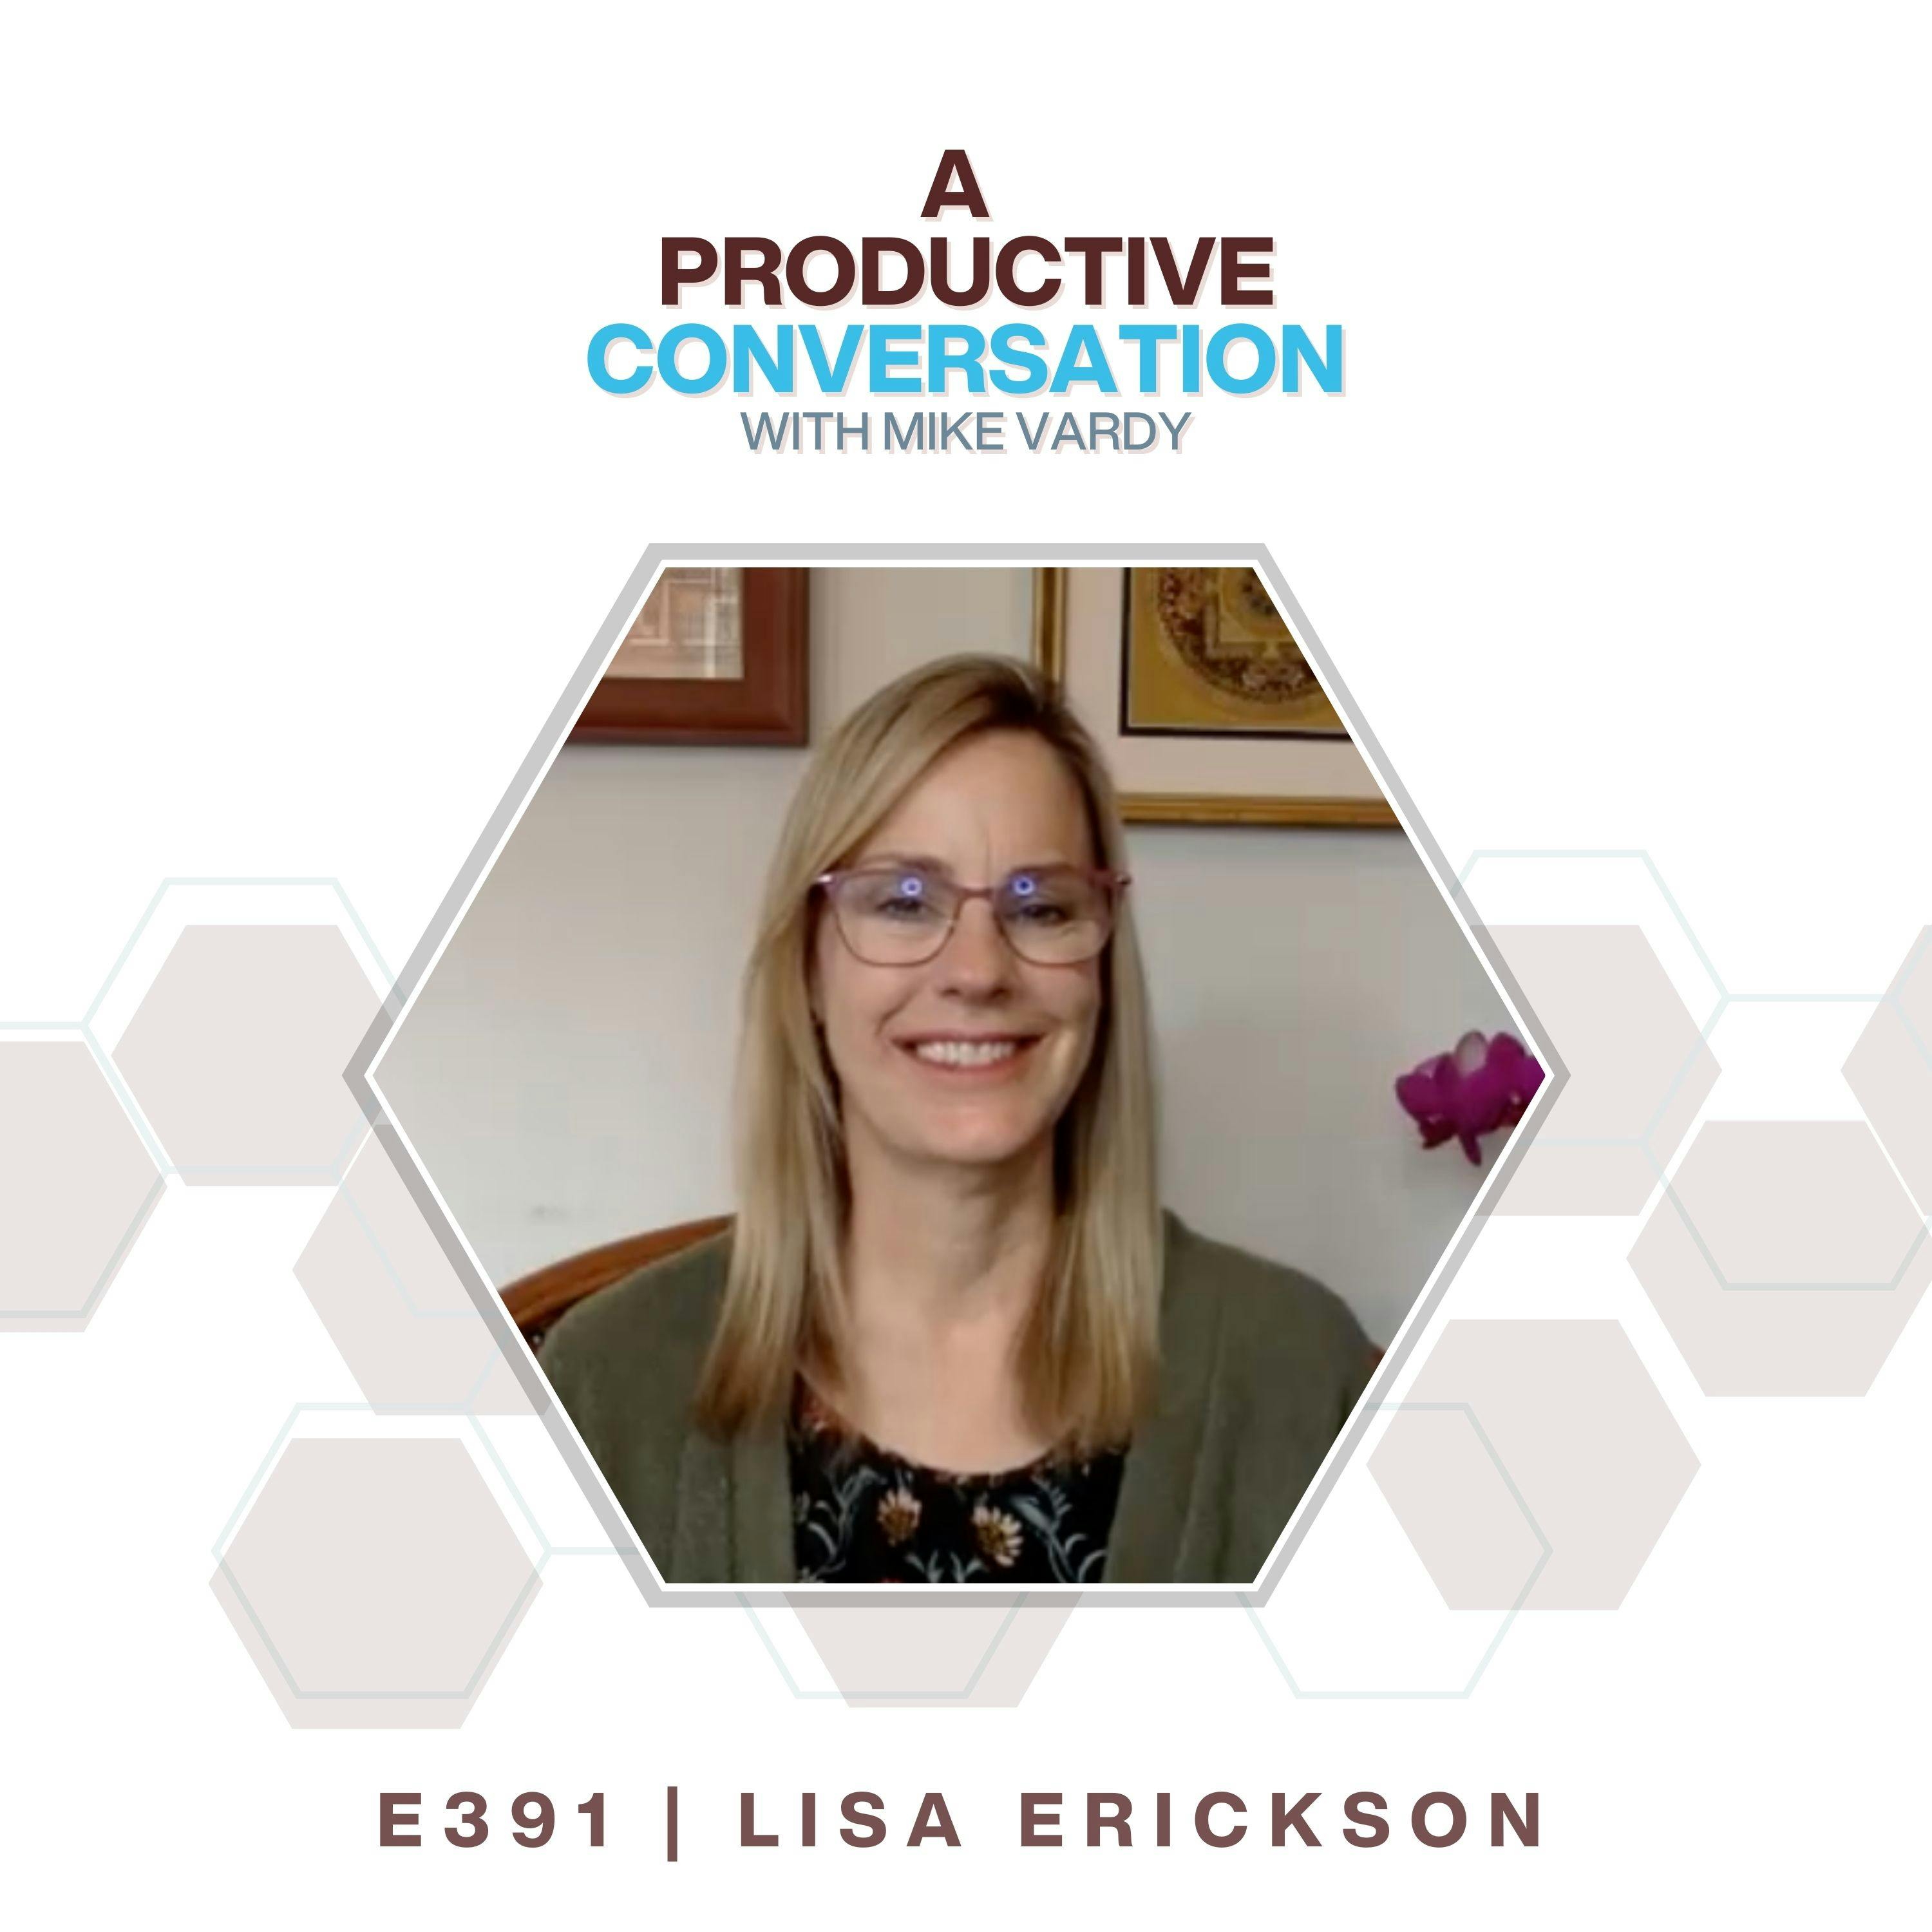 Lisa Erickson talks about the Art and Science of Meditation